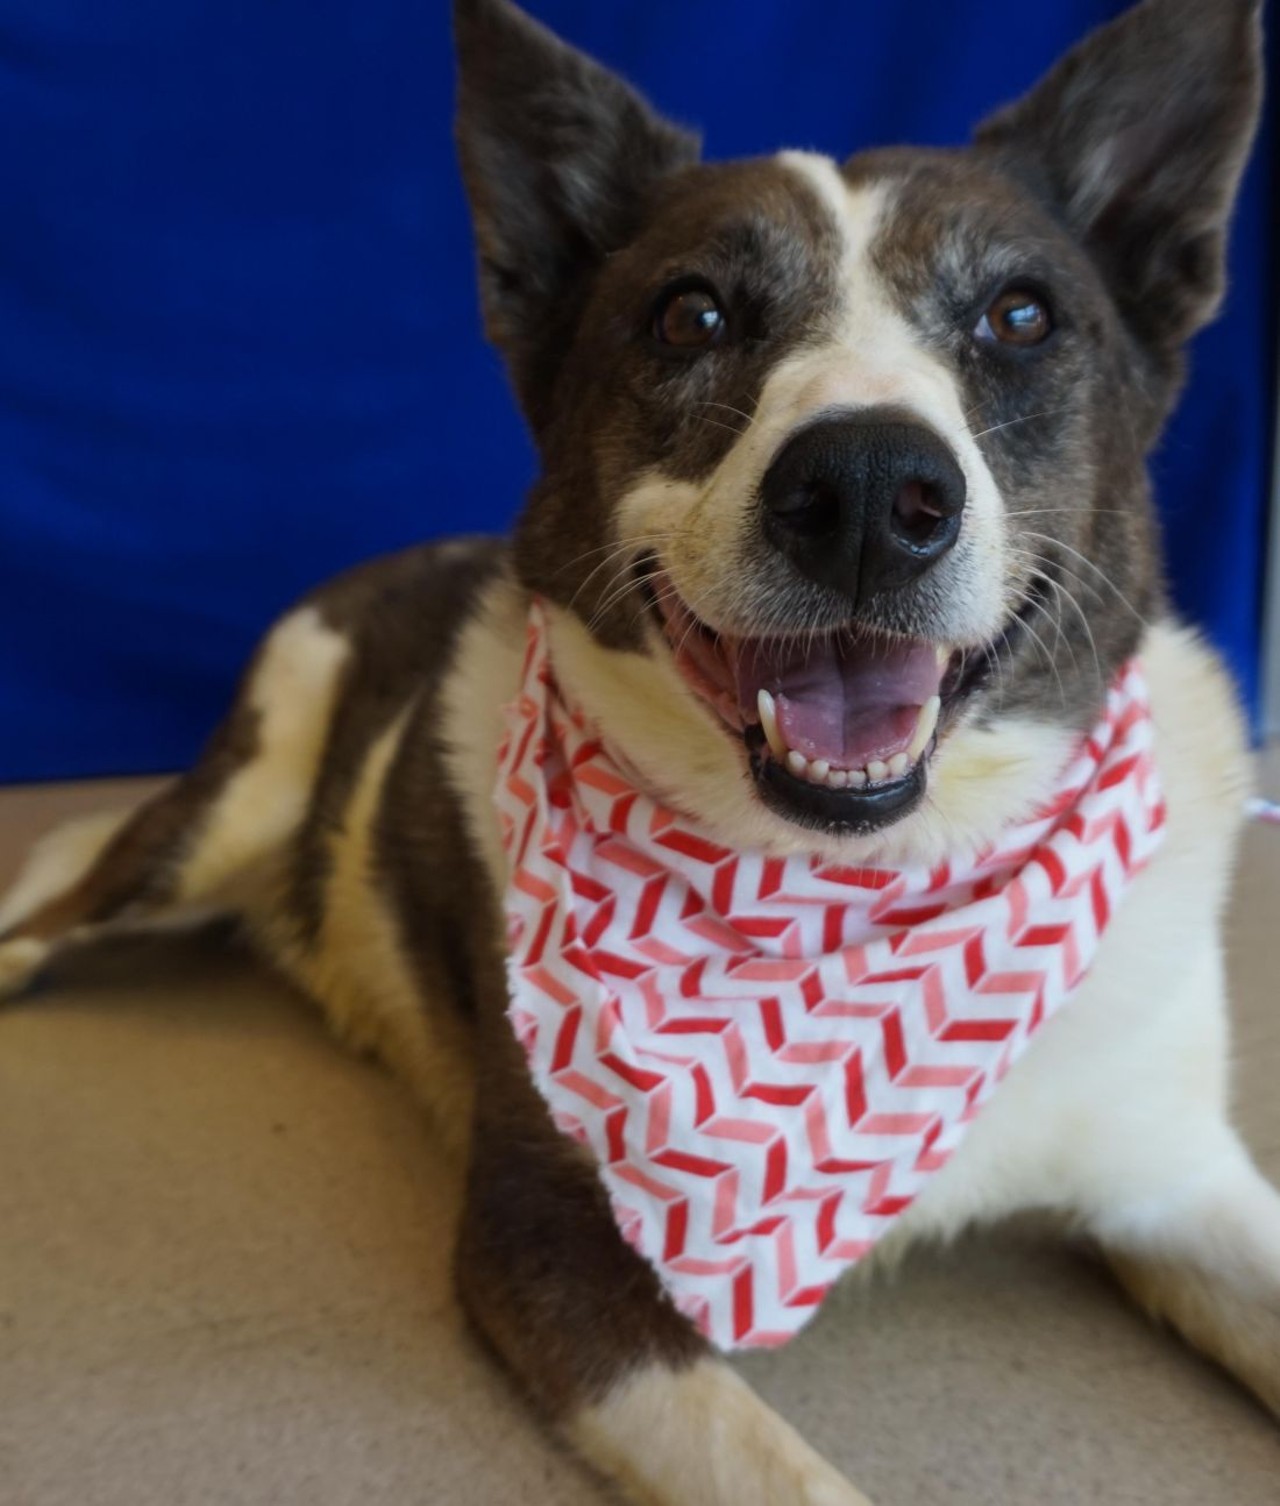 NAME: Clover
GENDER: Female
BREED: Australian Shepherd
AGE: 5 years, 1 month
WEIGHT: 57 pounds
SPECIAL CONSIDERATIONS: Clover prefers a home with older or no children. She also needs to lose a little weight.
REASON I CAME TO MHS: Agency transfer
LOCATION: Rochester Hills Center for Animal Care
ID NUMBER: 868932